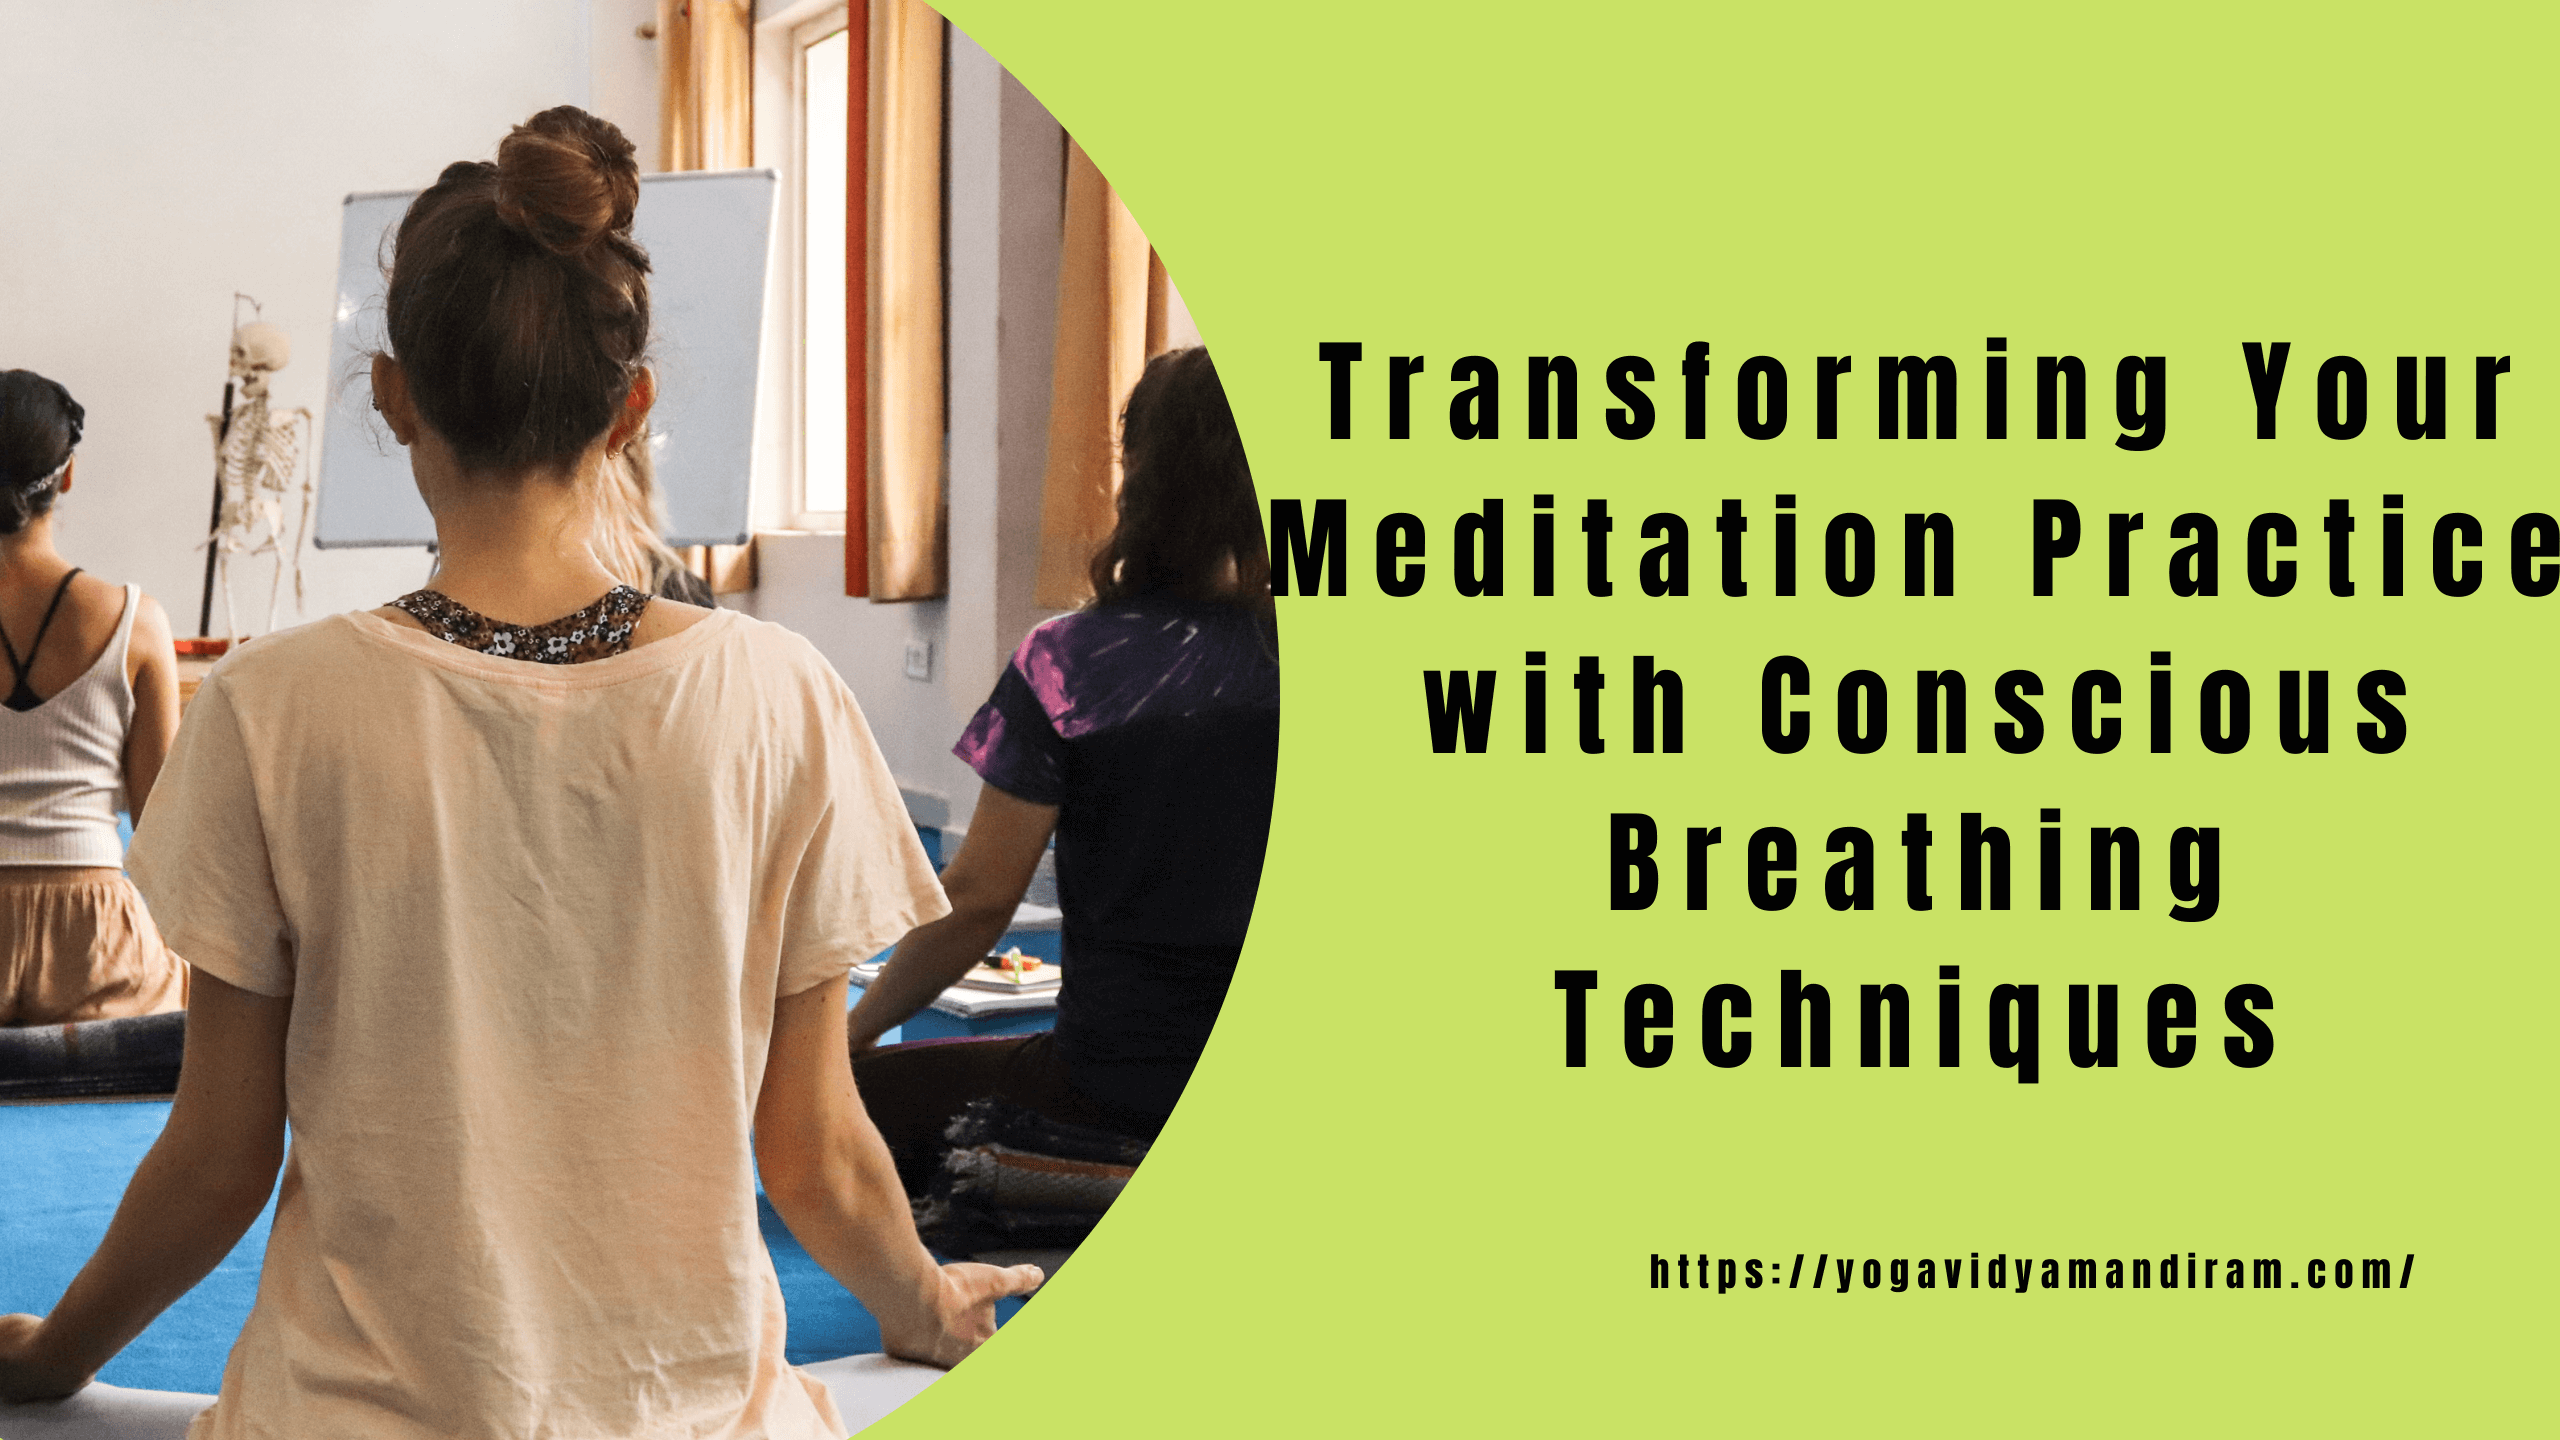 Meditation Practice with Conscious Breathing